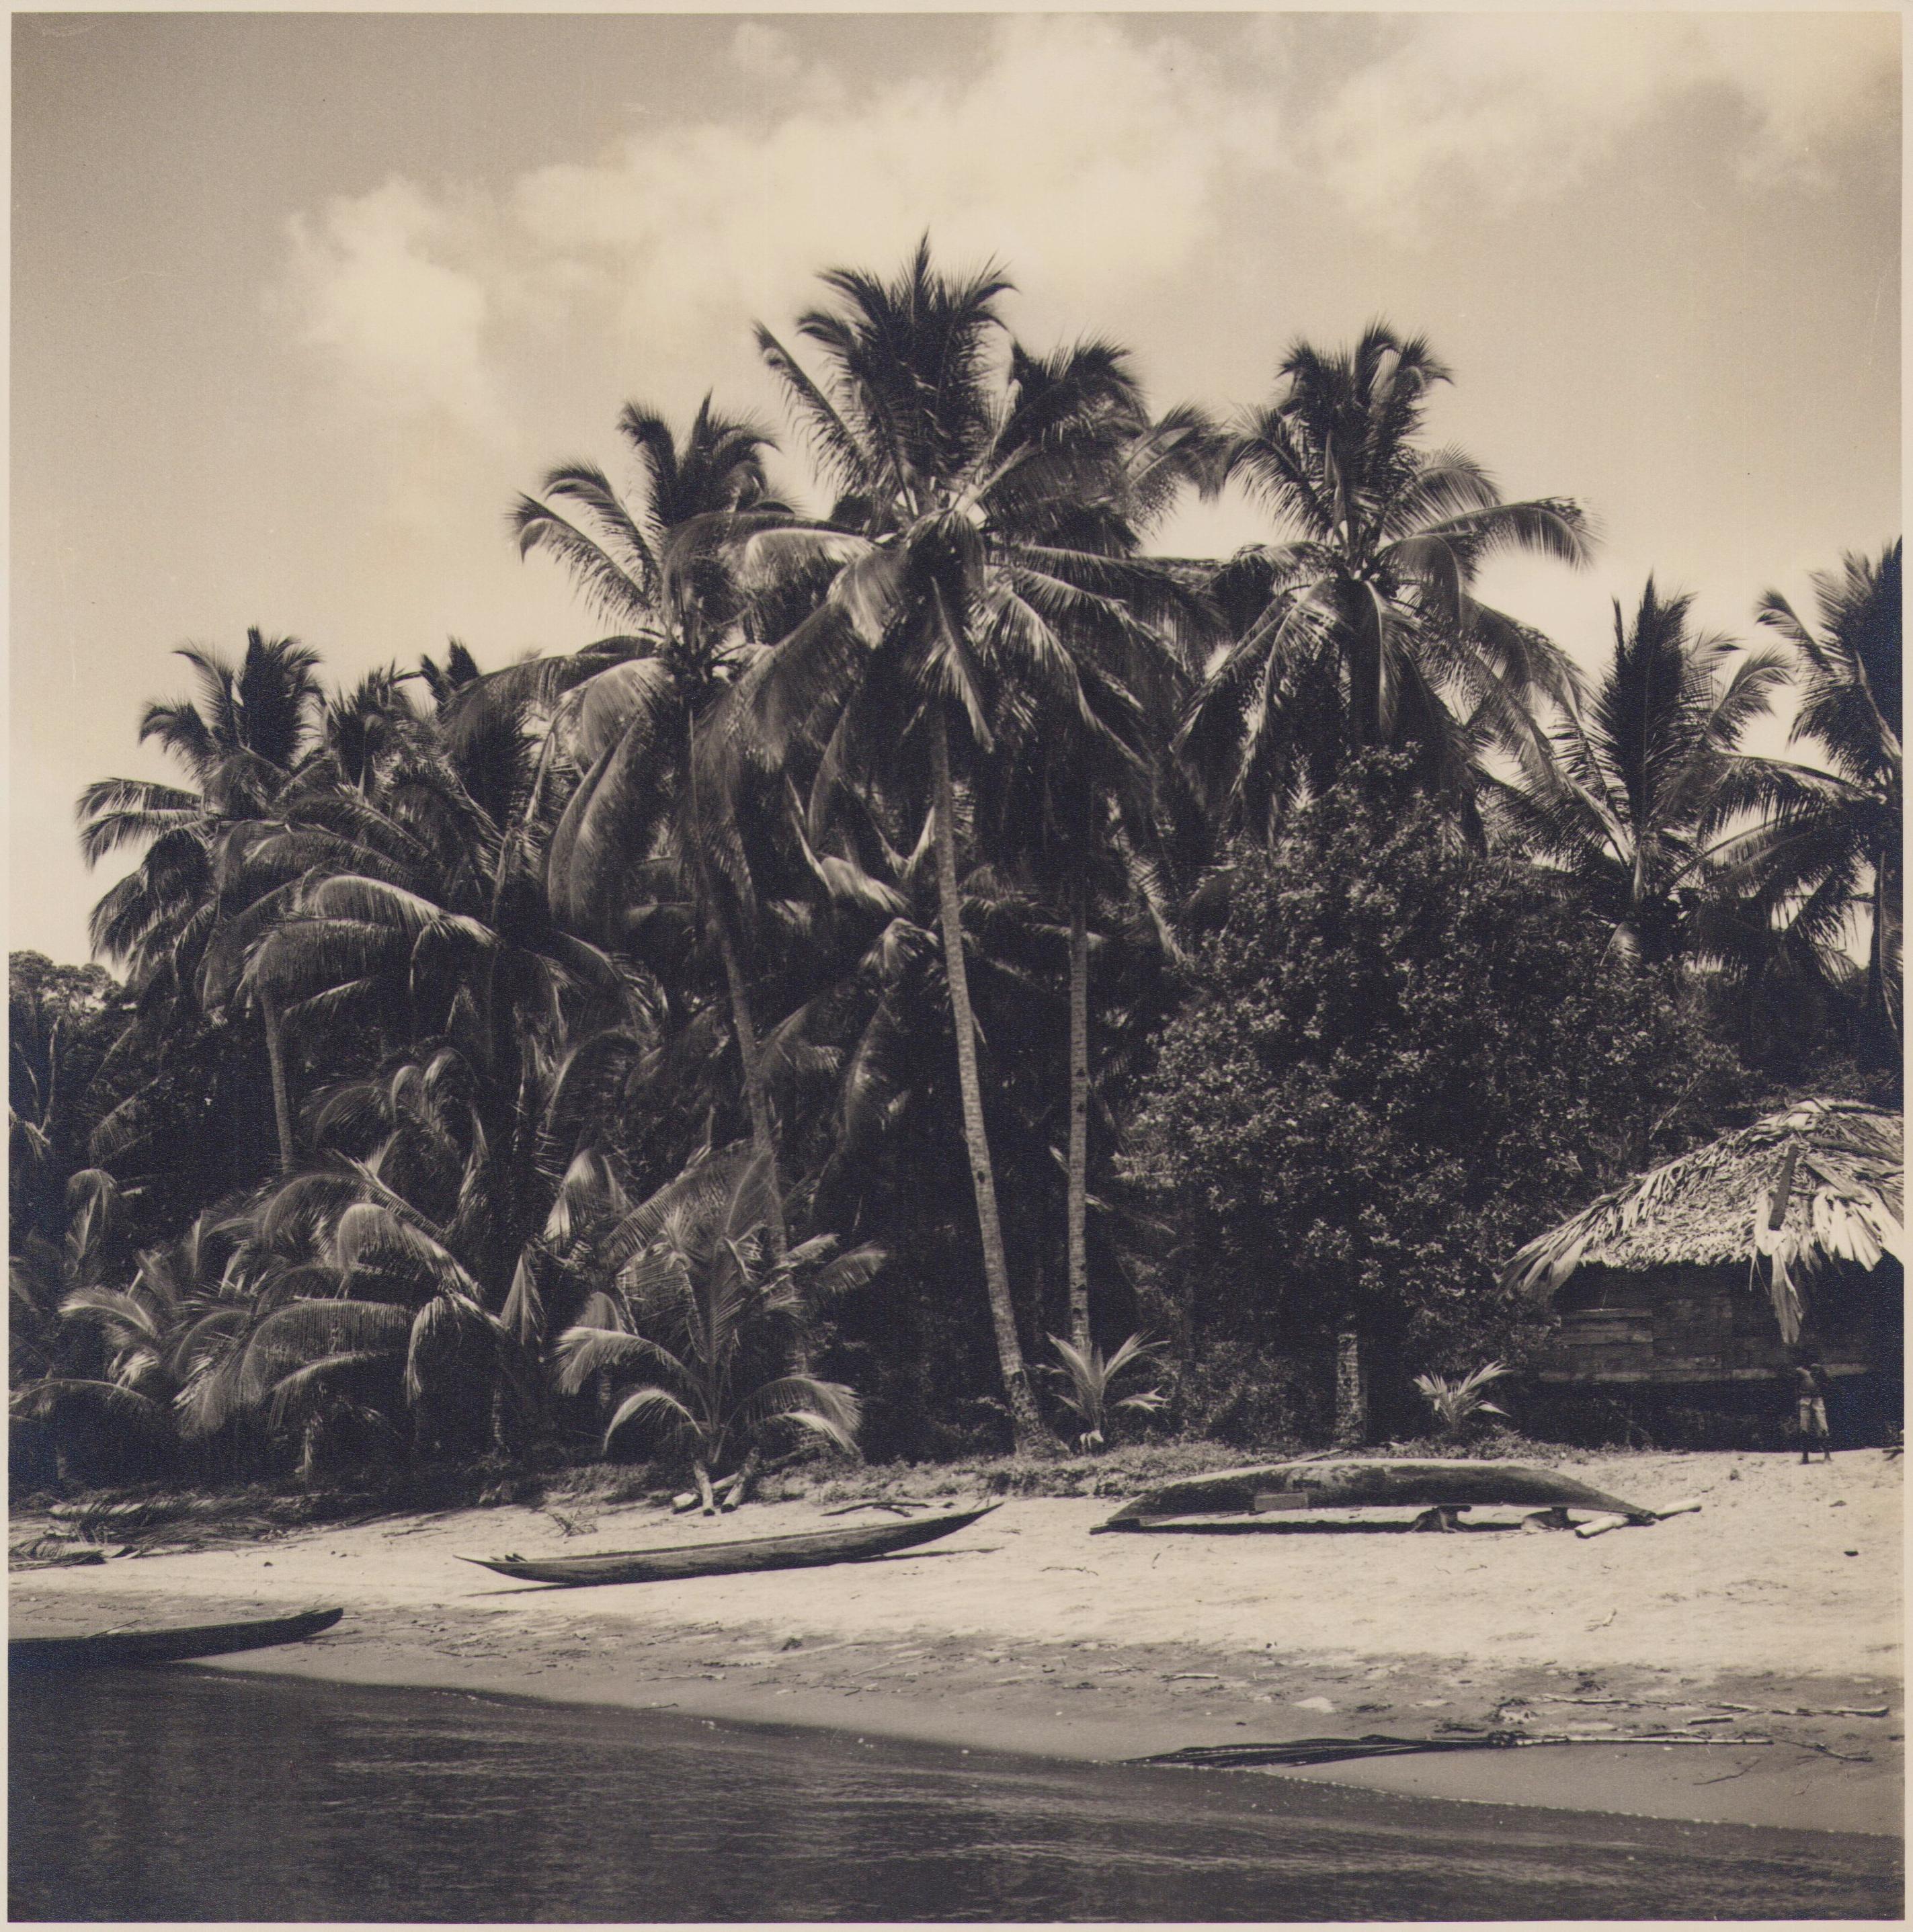 Colombia, Palmtrees, Beach, Black and White Photography, 1960s, 24, 4 x 24, 1 cm